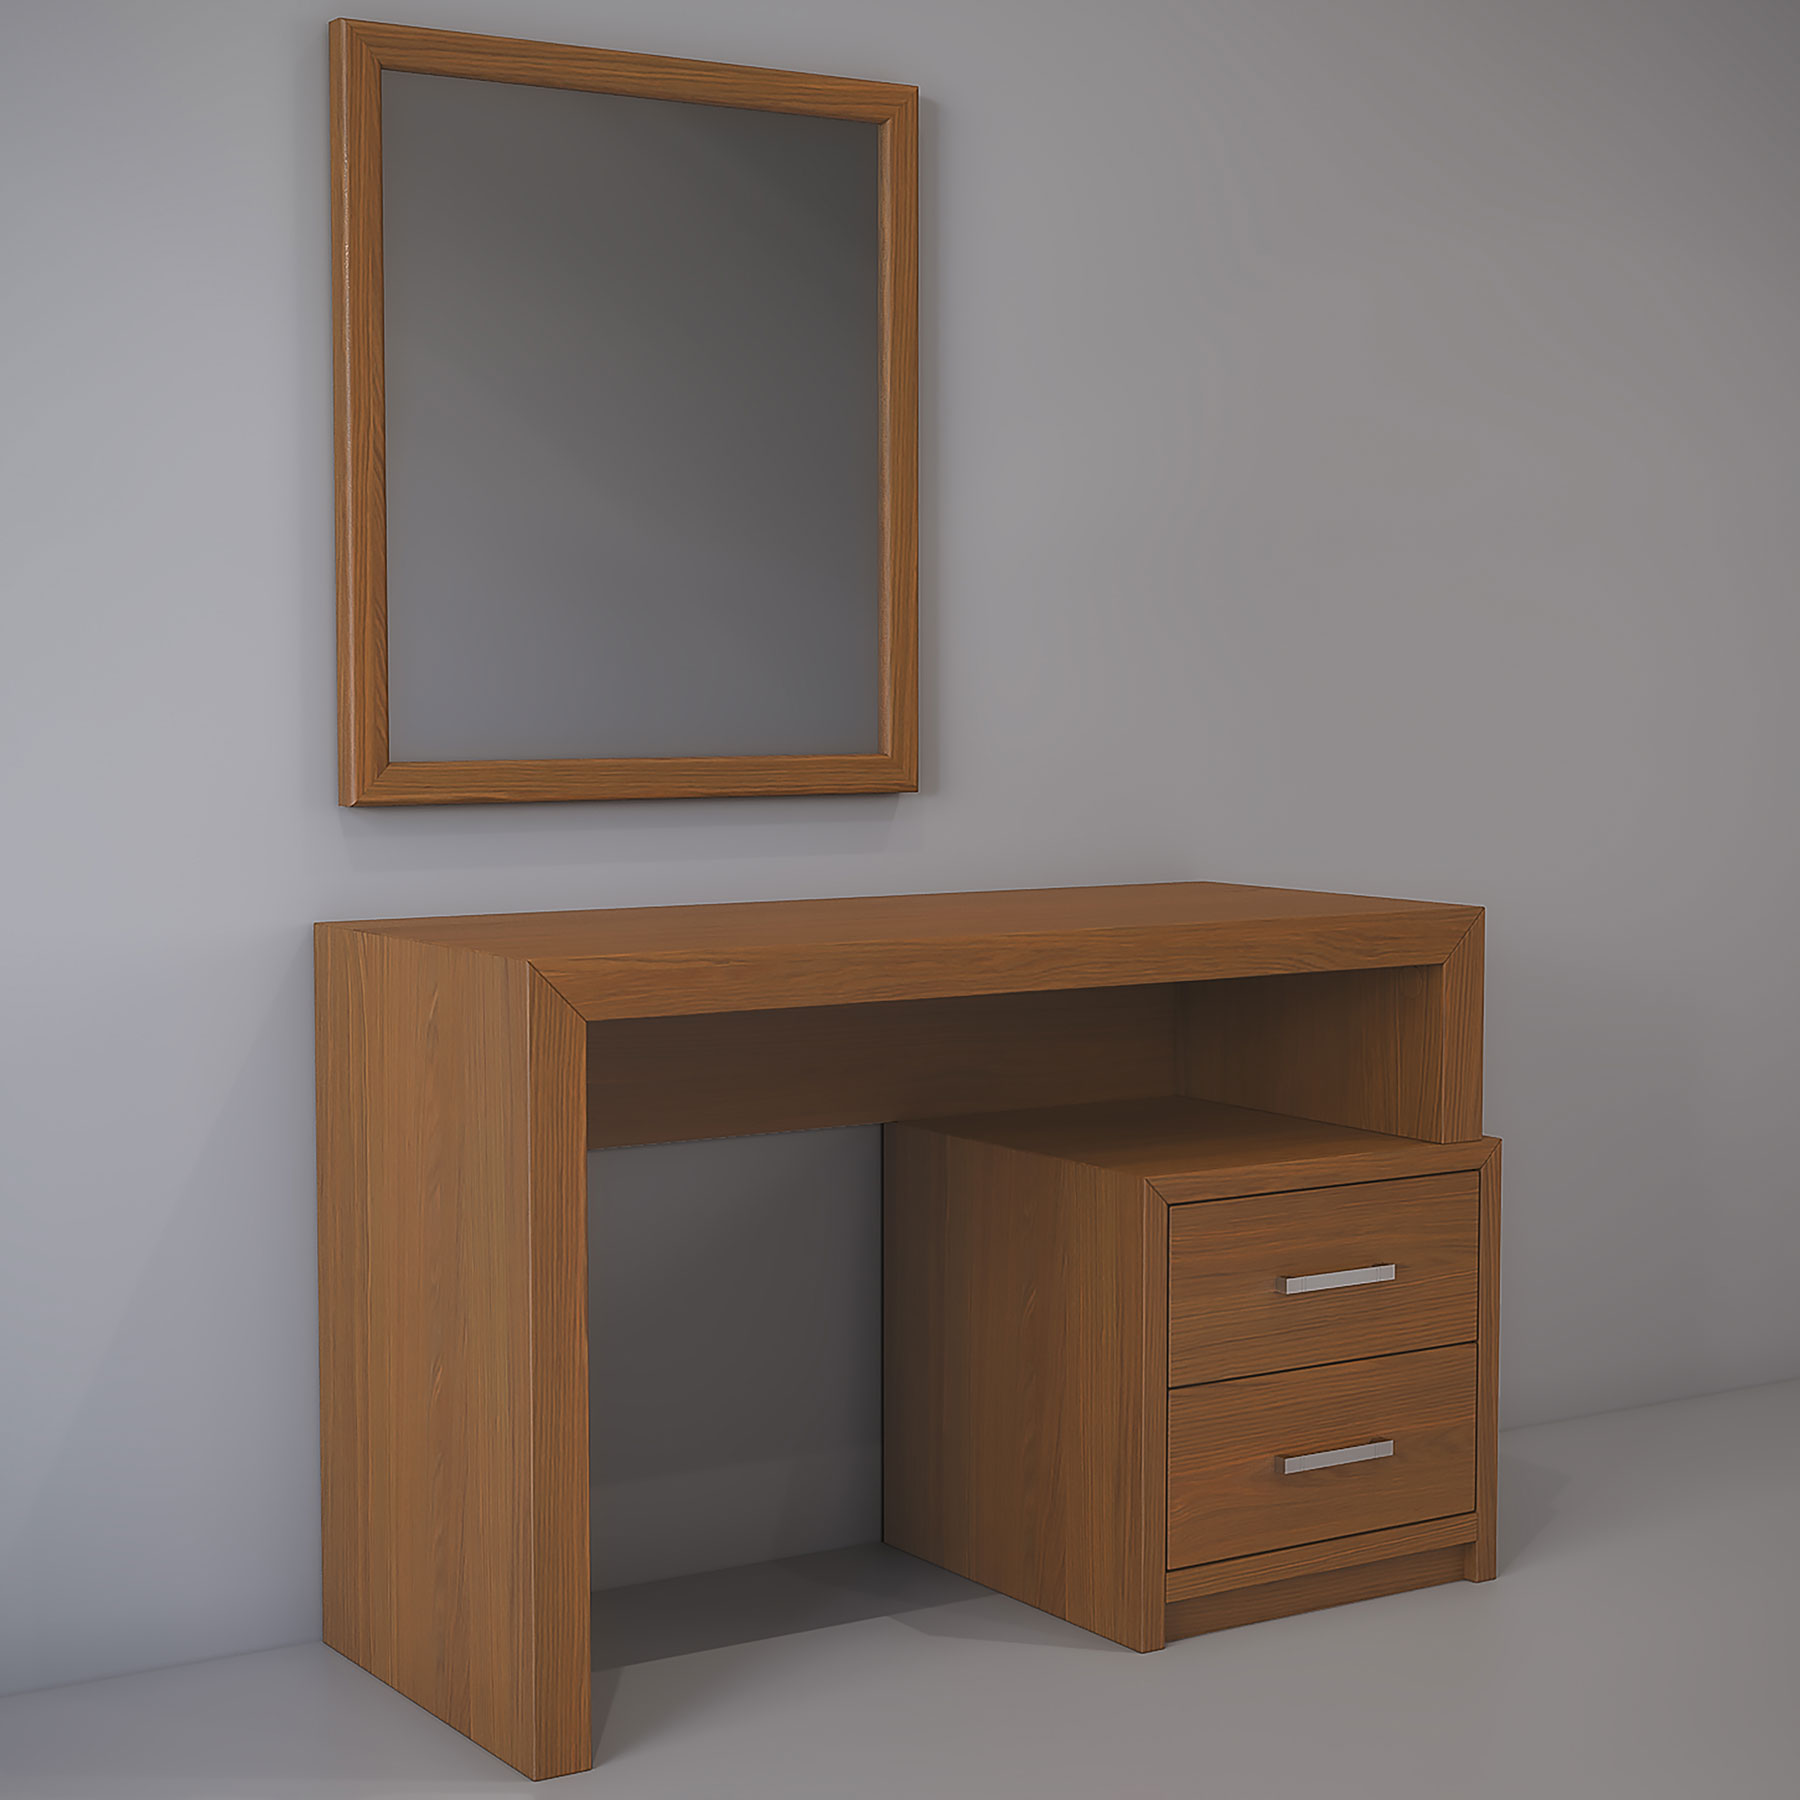 Verona dressing table and mirror 2